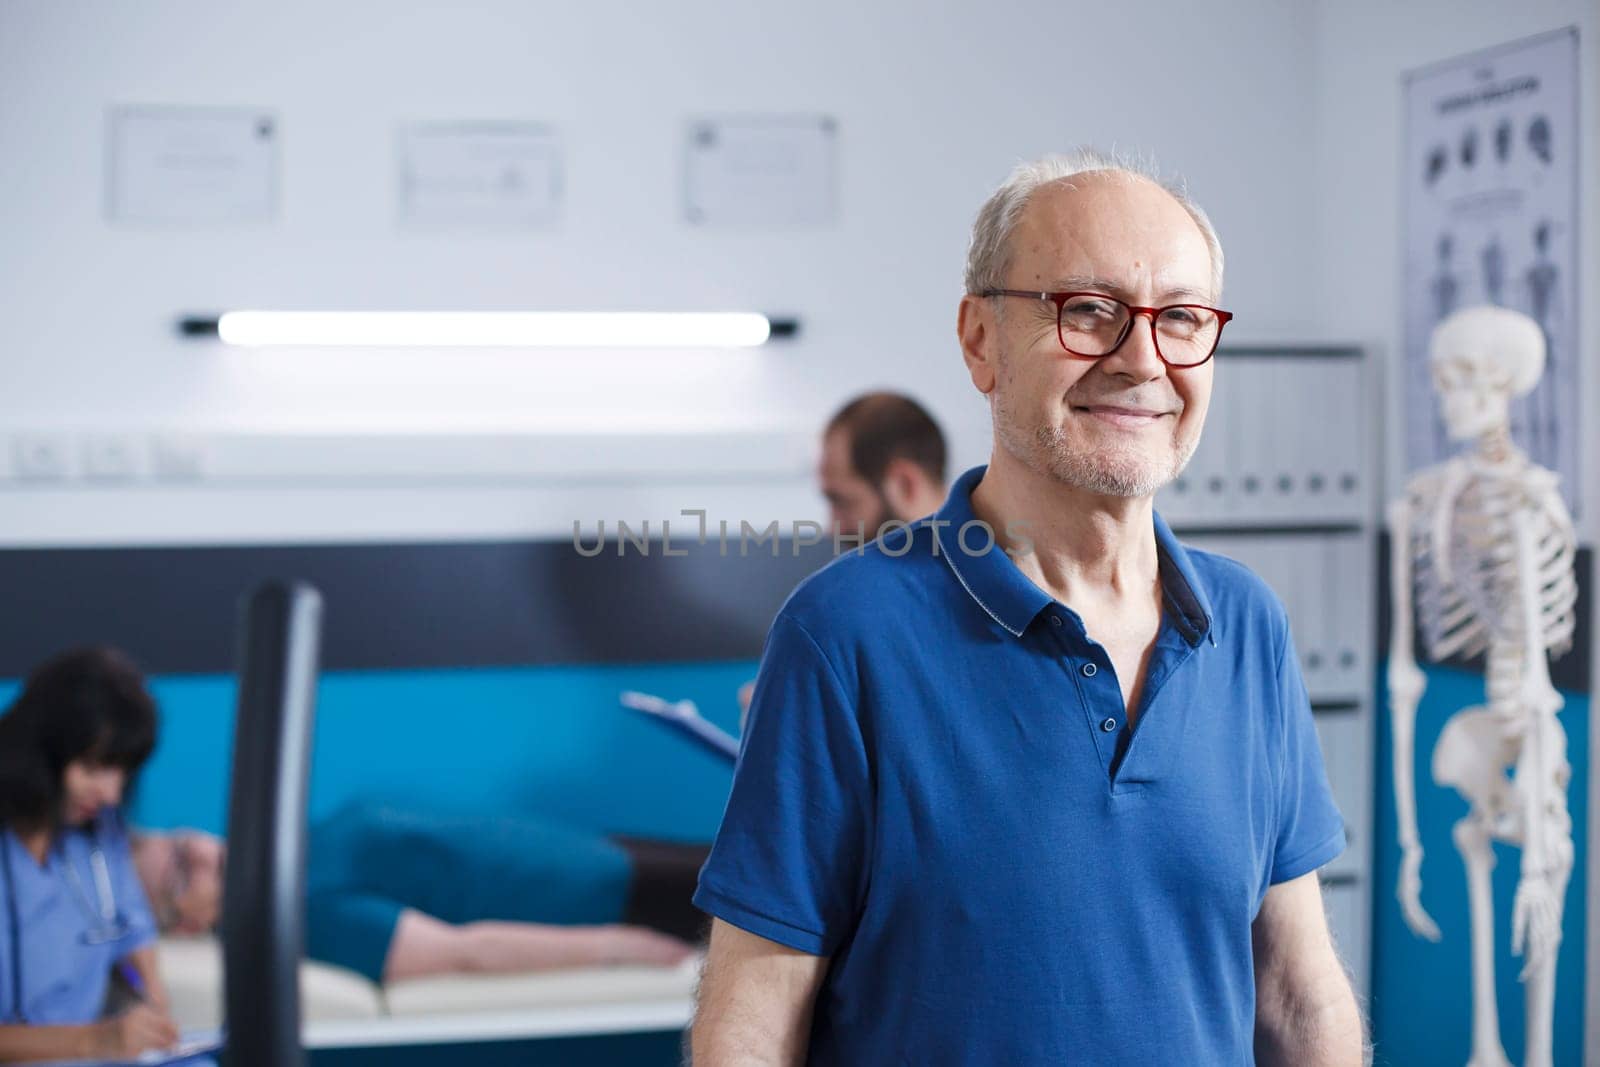 Elderly man with glasses standing in a physiotherapy facility. Retired senior patient smiling at camera as he gets ready for his recovery at clinic for rehabilitation treatment through fitness.